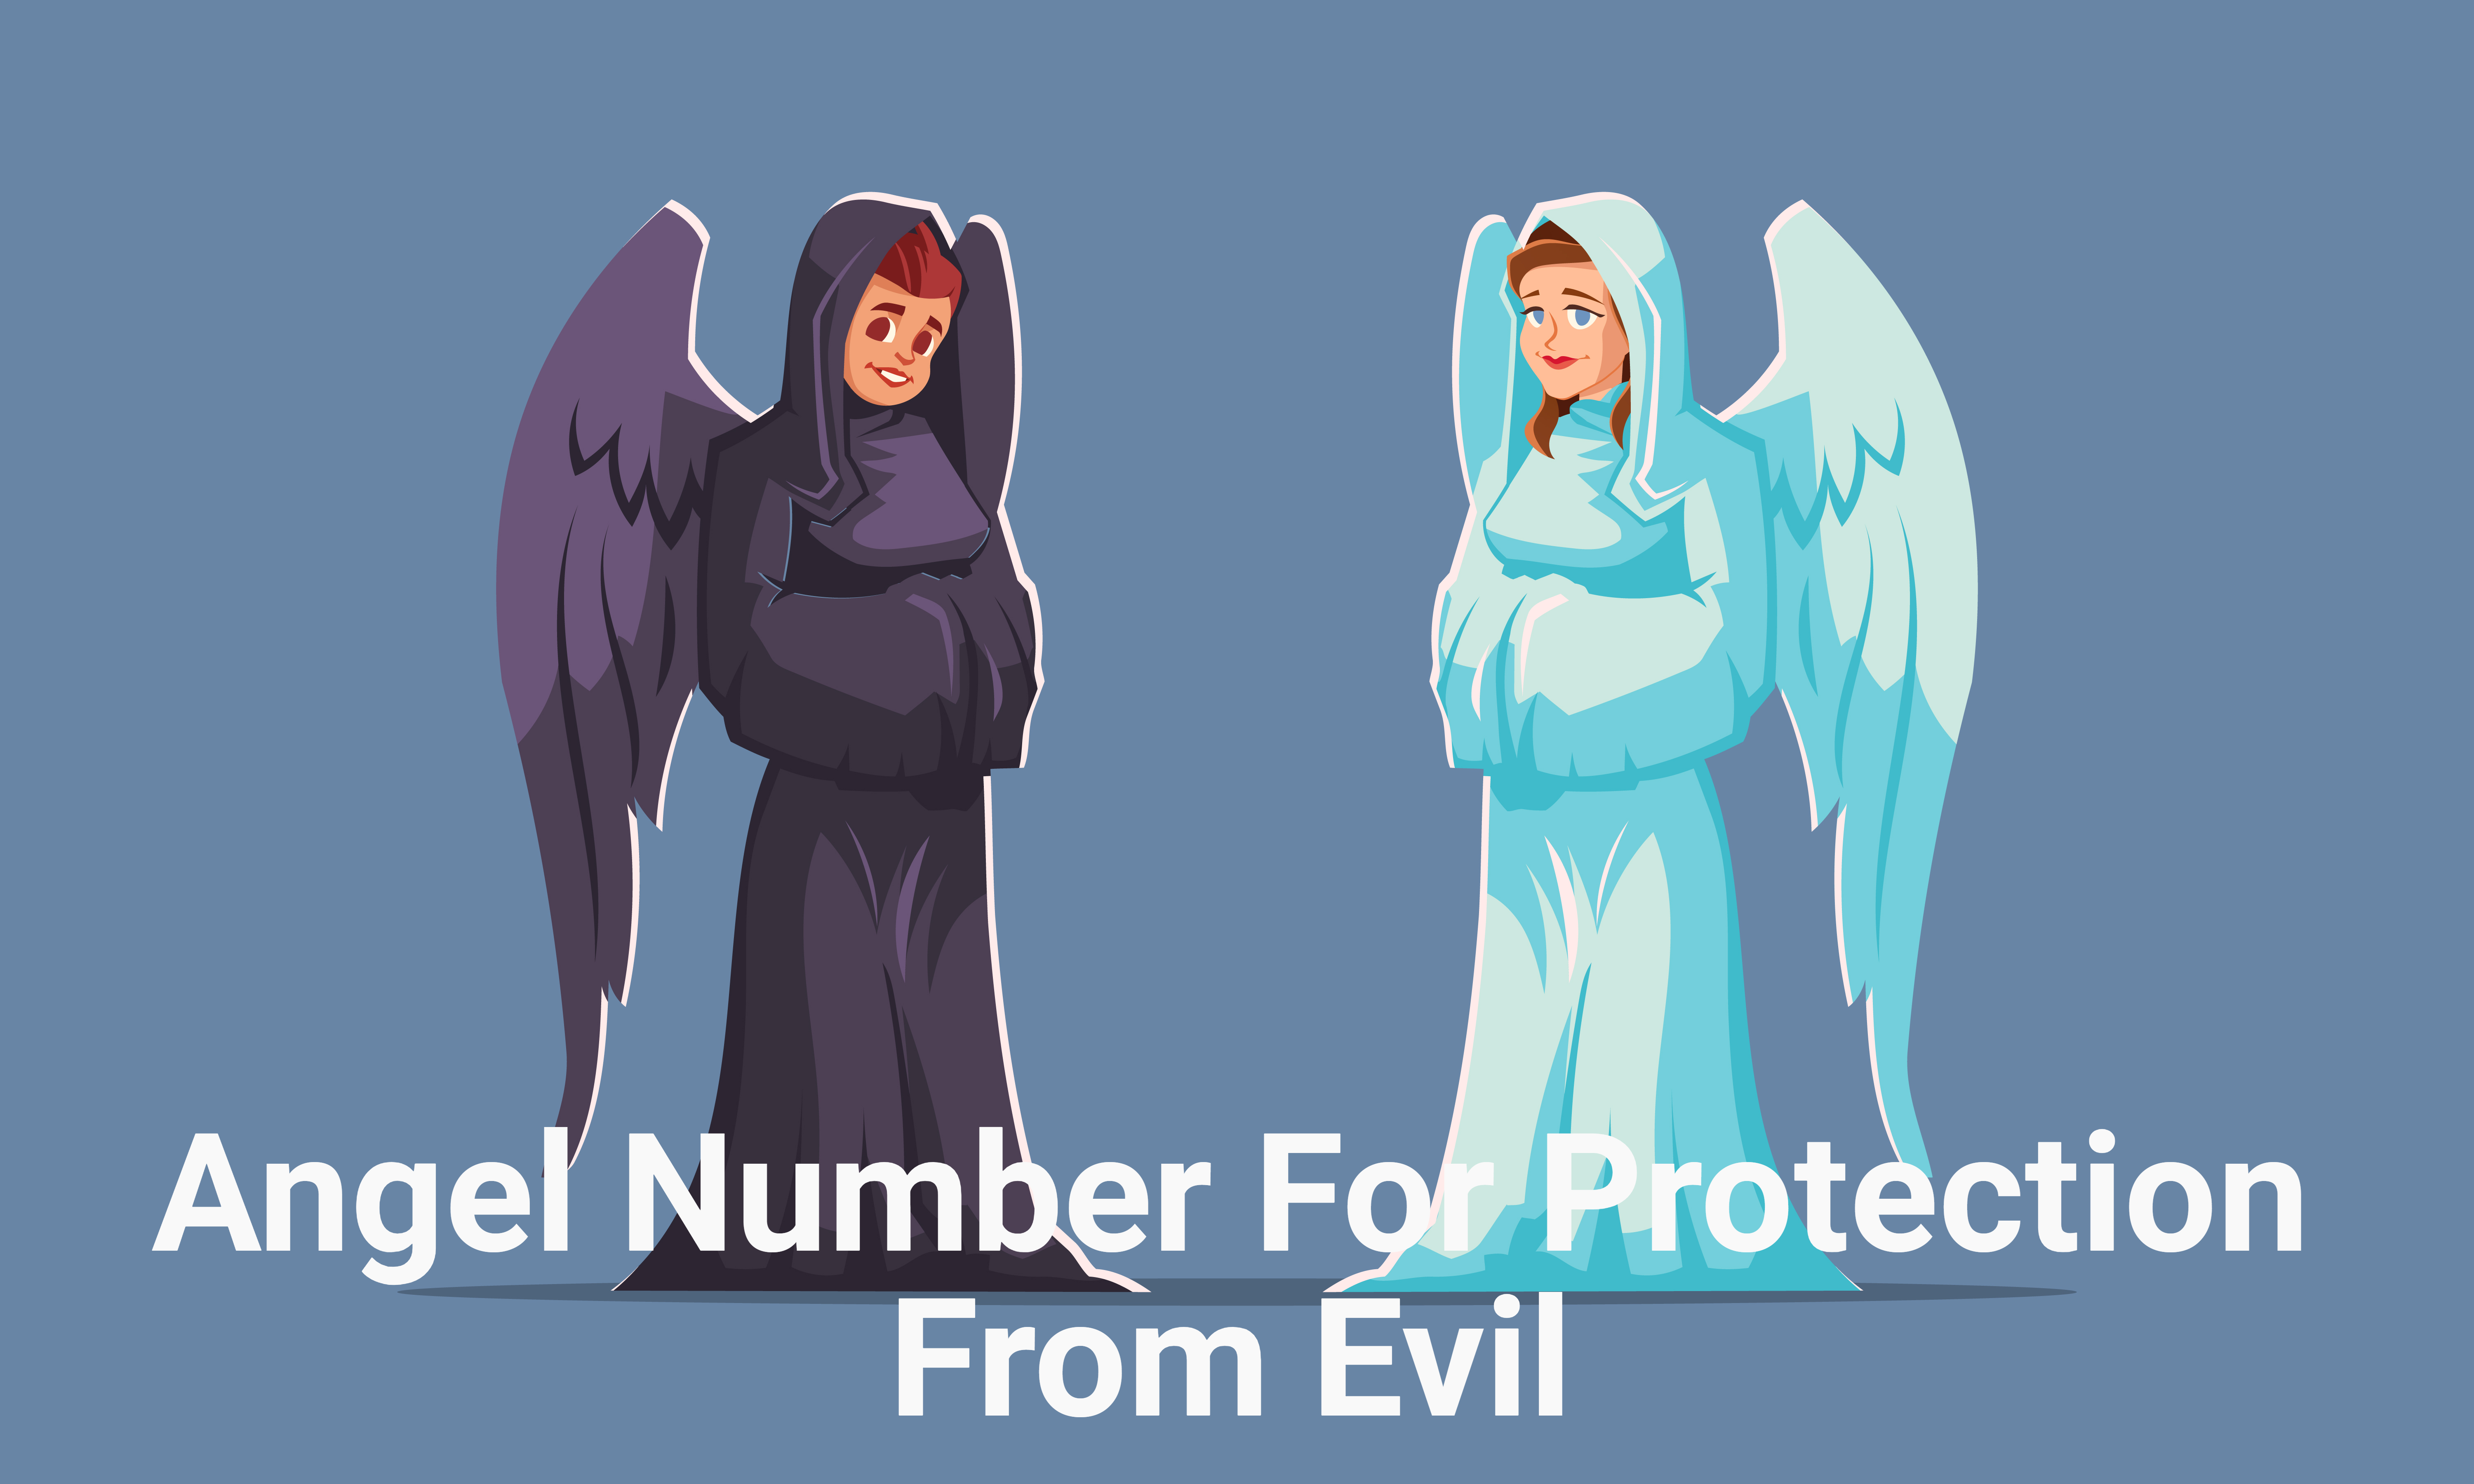 Angel Number For Protection From Evil - How Does It Provide Protection?